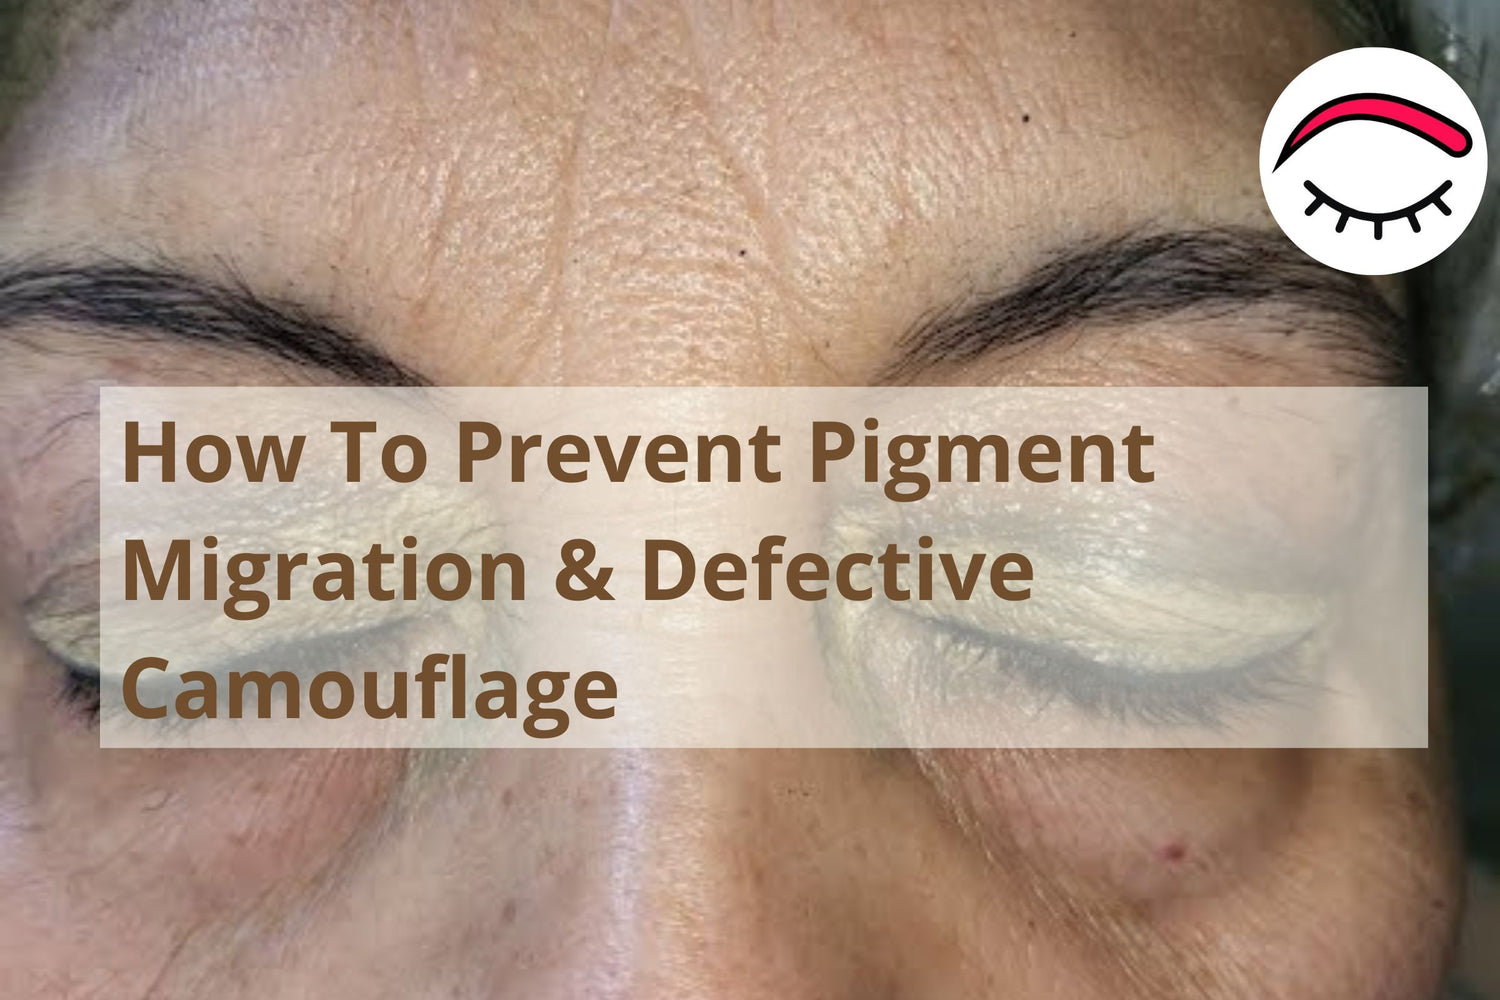 How To Prevent Pigment Migration & Defective Camouflage